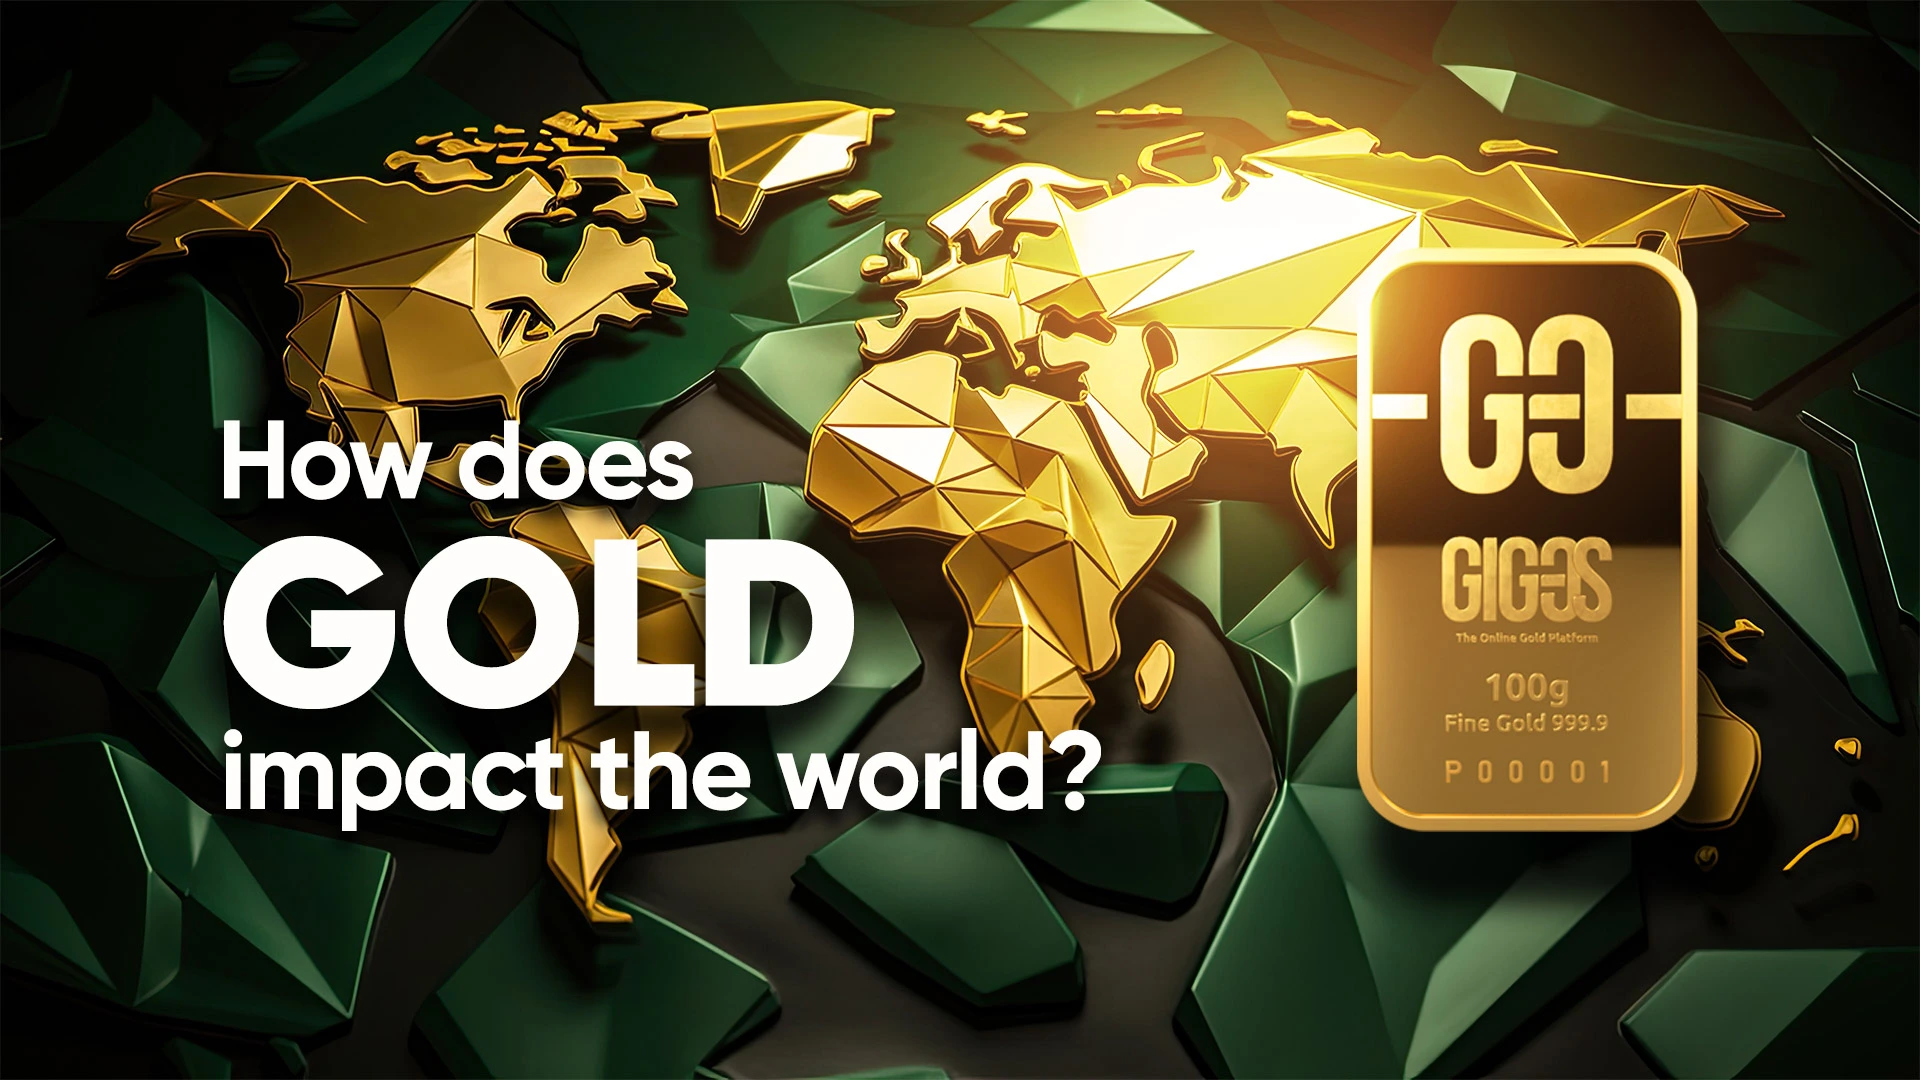  [VIDEO] How does gold change the world?
